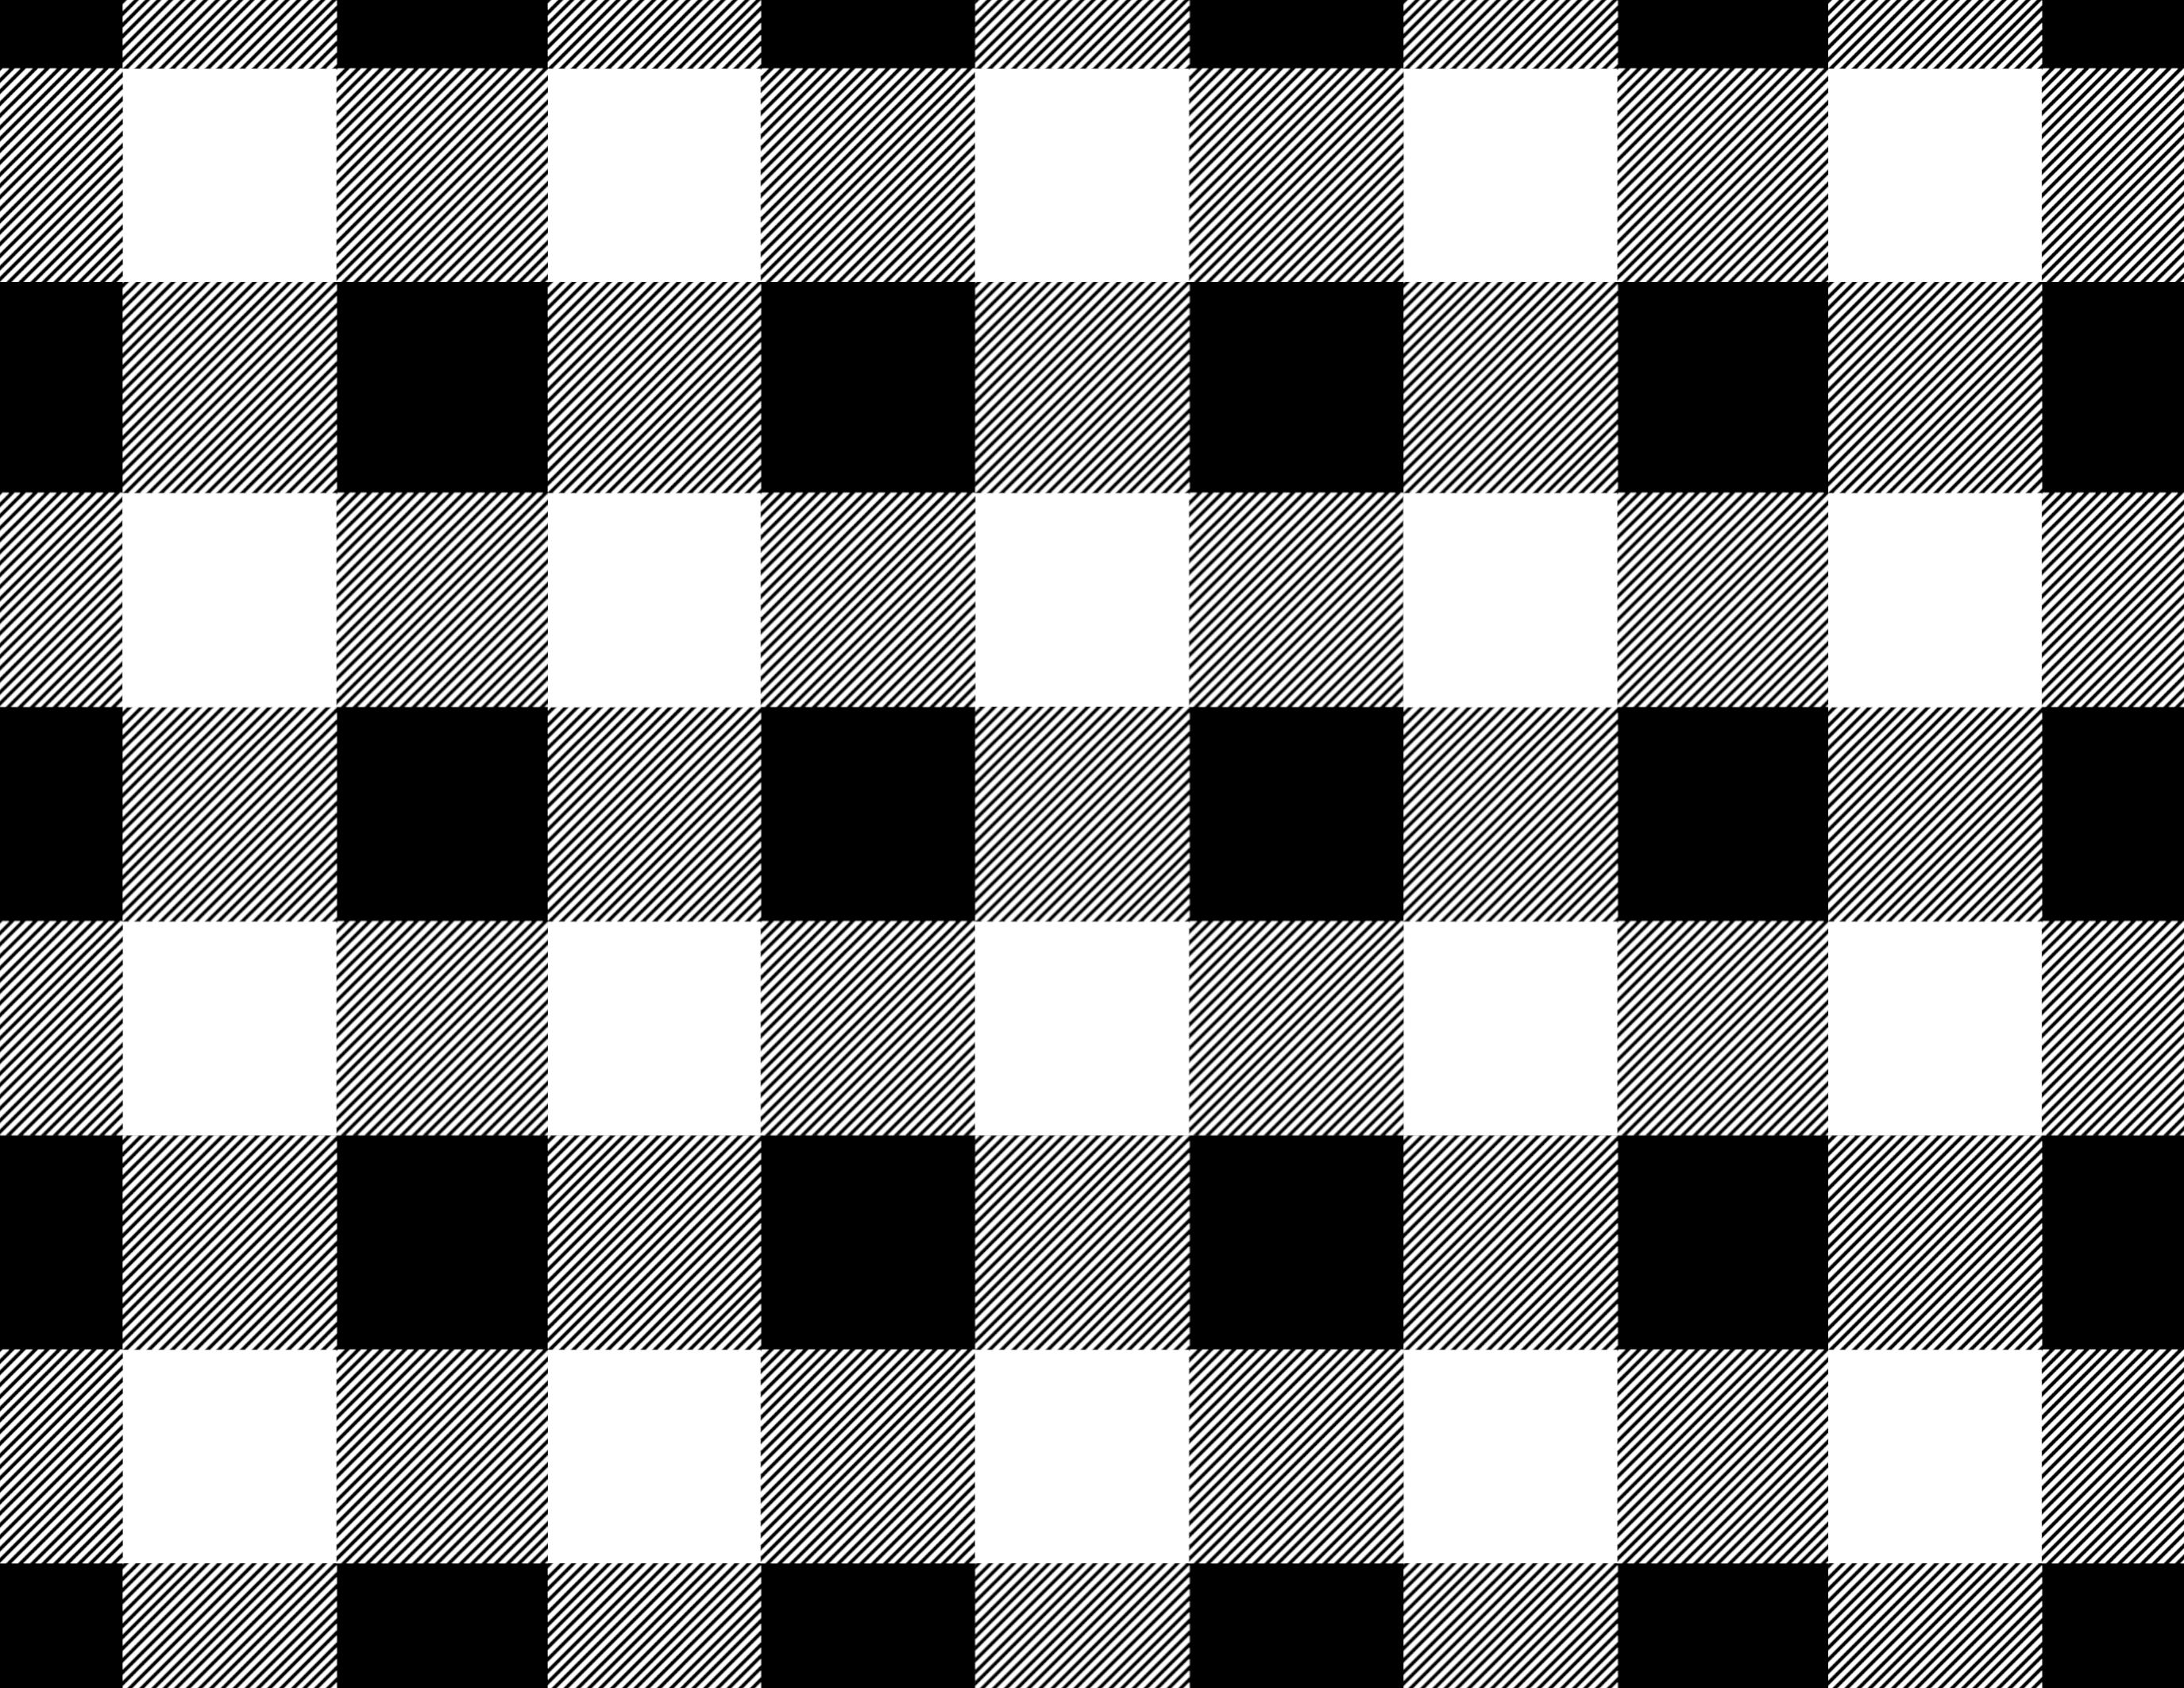 https://www.papertraildesign.com/wp-content/uploads/2018/10/Black-white-plaid-wrapping-paper.jpg